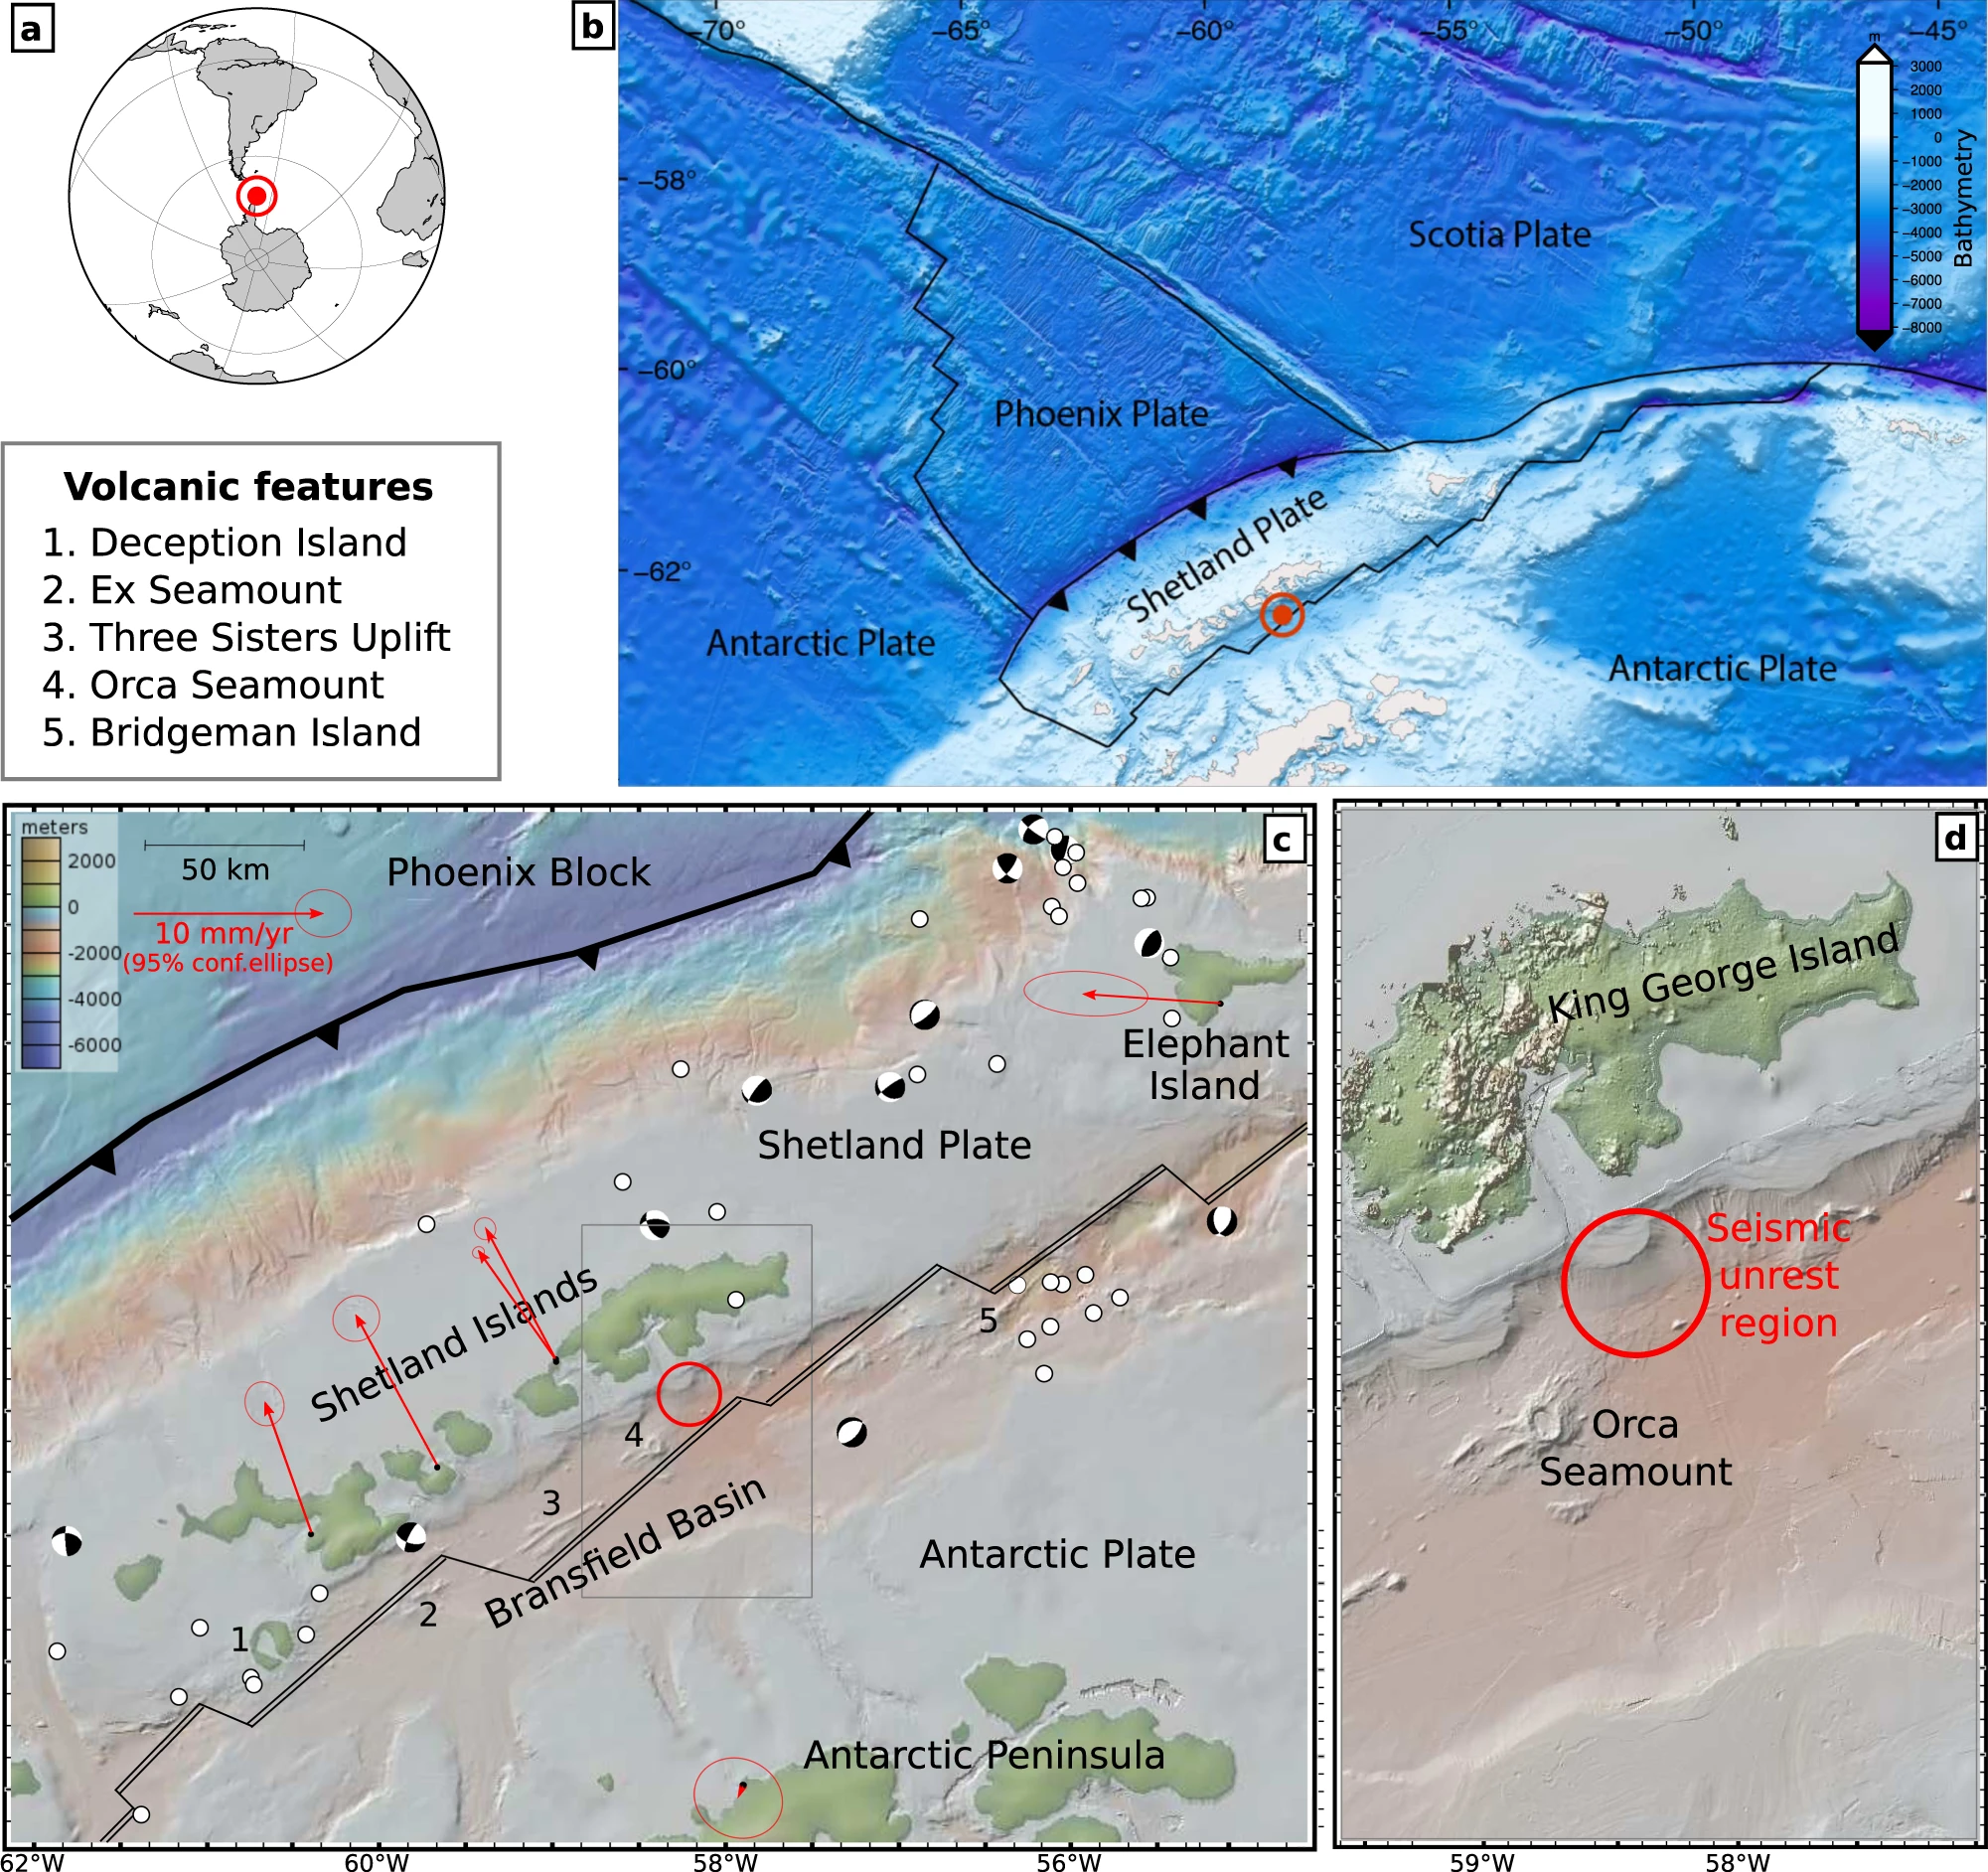 EMBED PM Earthquake Swarm Antarctica 02a Fig1 Paper CCby4